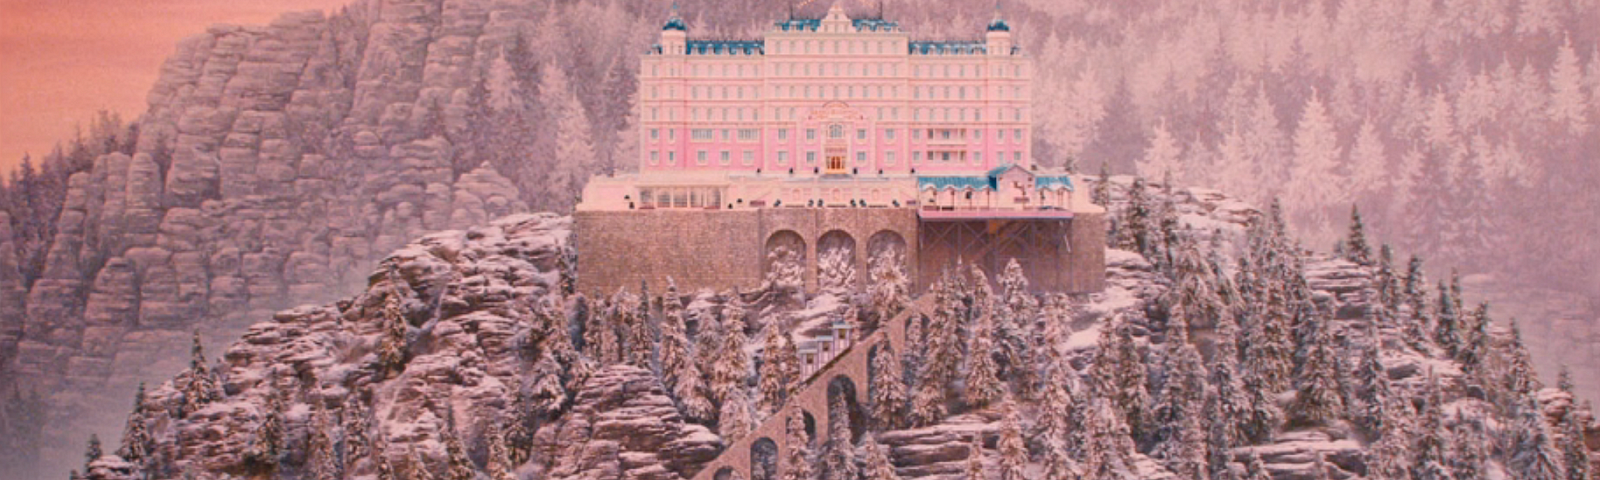 A lavish, pink hotel sits atop a tall, snowy mountain against a pink-er sky and tree-crested alps